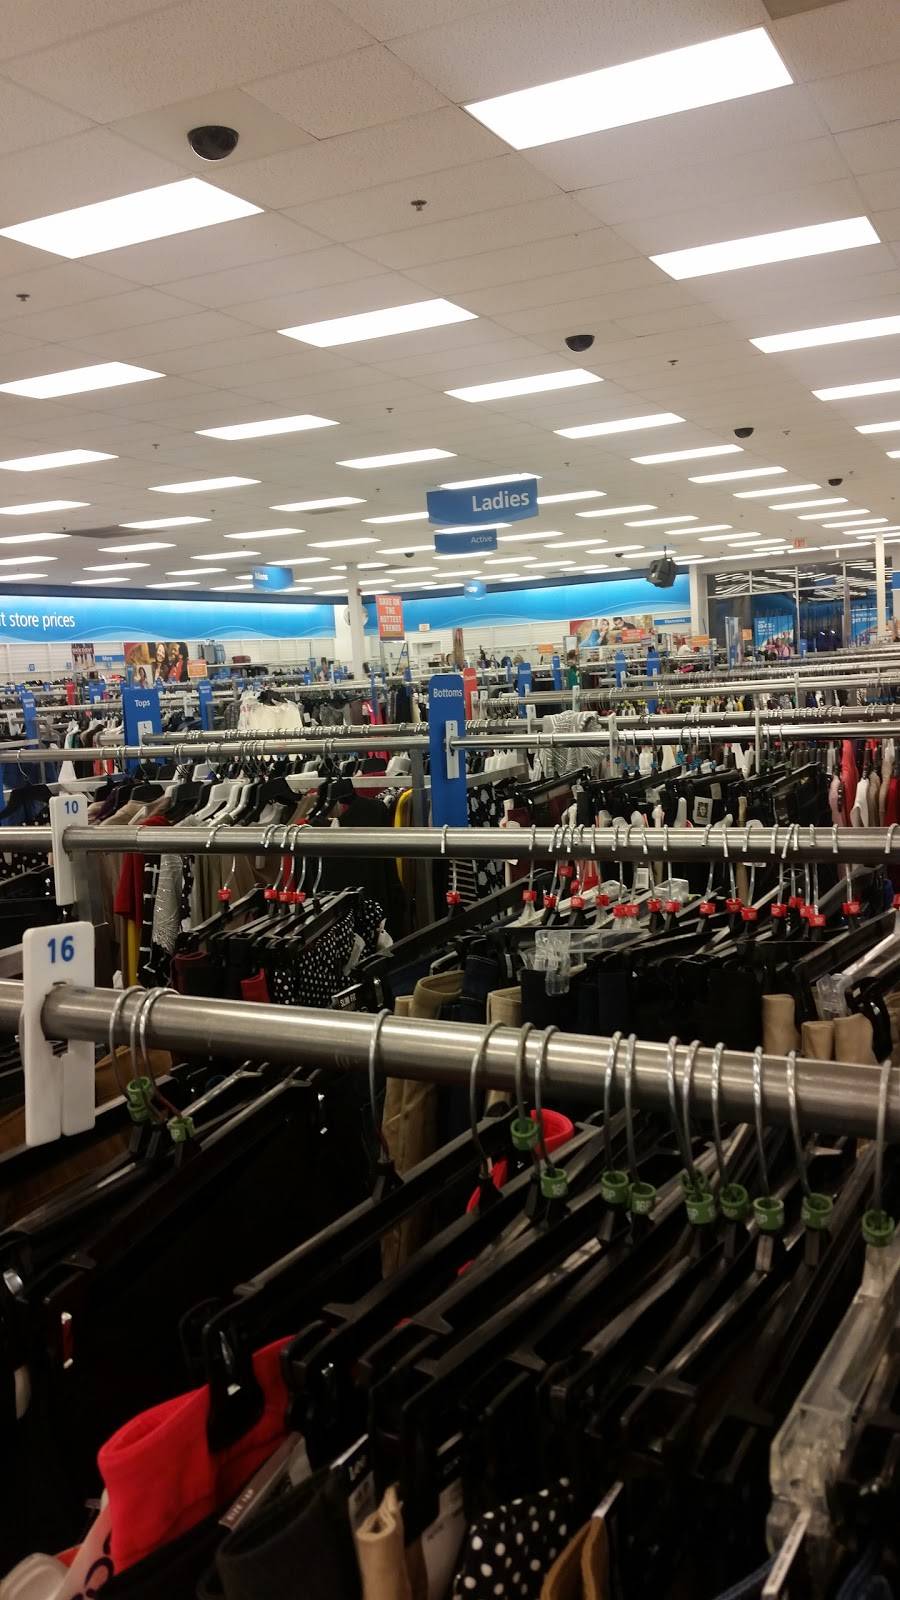 Ross Dress for Less | 958 W St Rd, Warminster, PA 18974, USA | Phone: (215) 956-0410